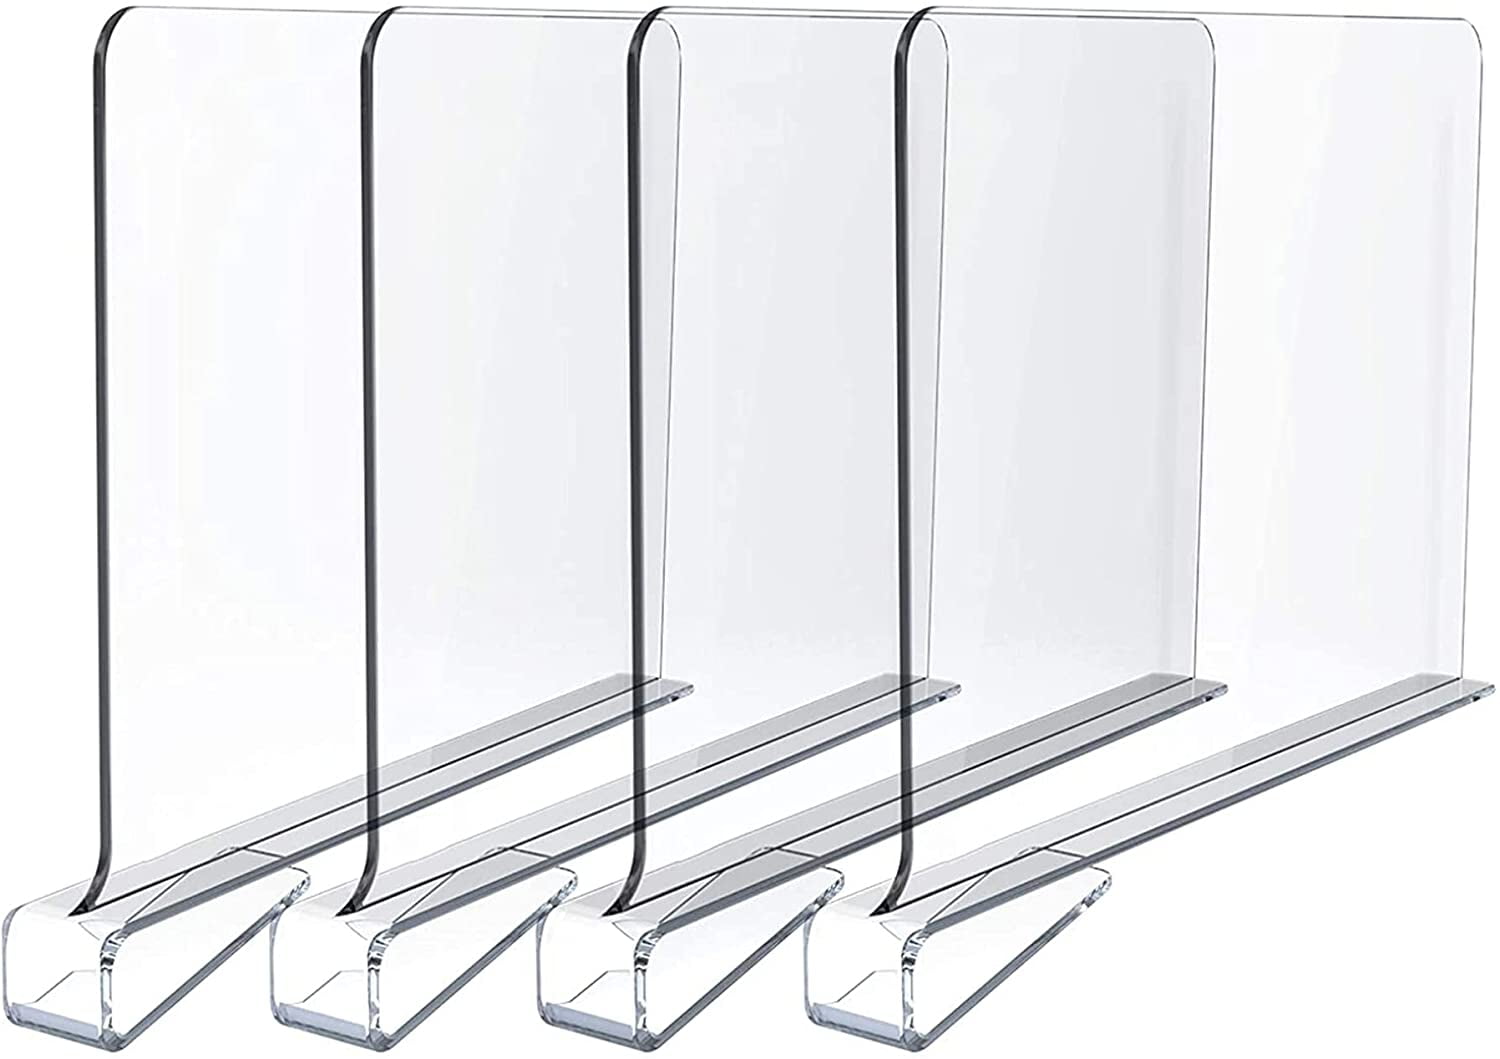  Cq acrylic 4PCS Shelf Dividers for Closets,Clear Acrylic Shelf  Divider for Wood Shelves and Clothes Organizer Purses Separators Perfect  for Kitchen Cabinets and Bedroom Organizer,Clear : Home & Kitchen